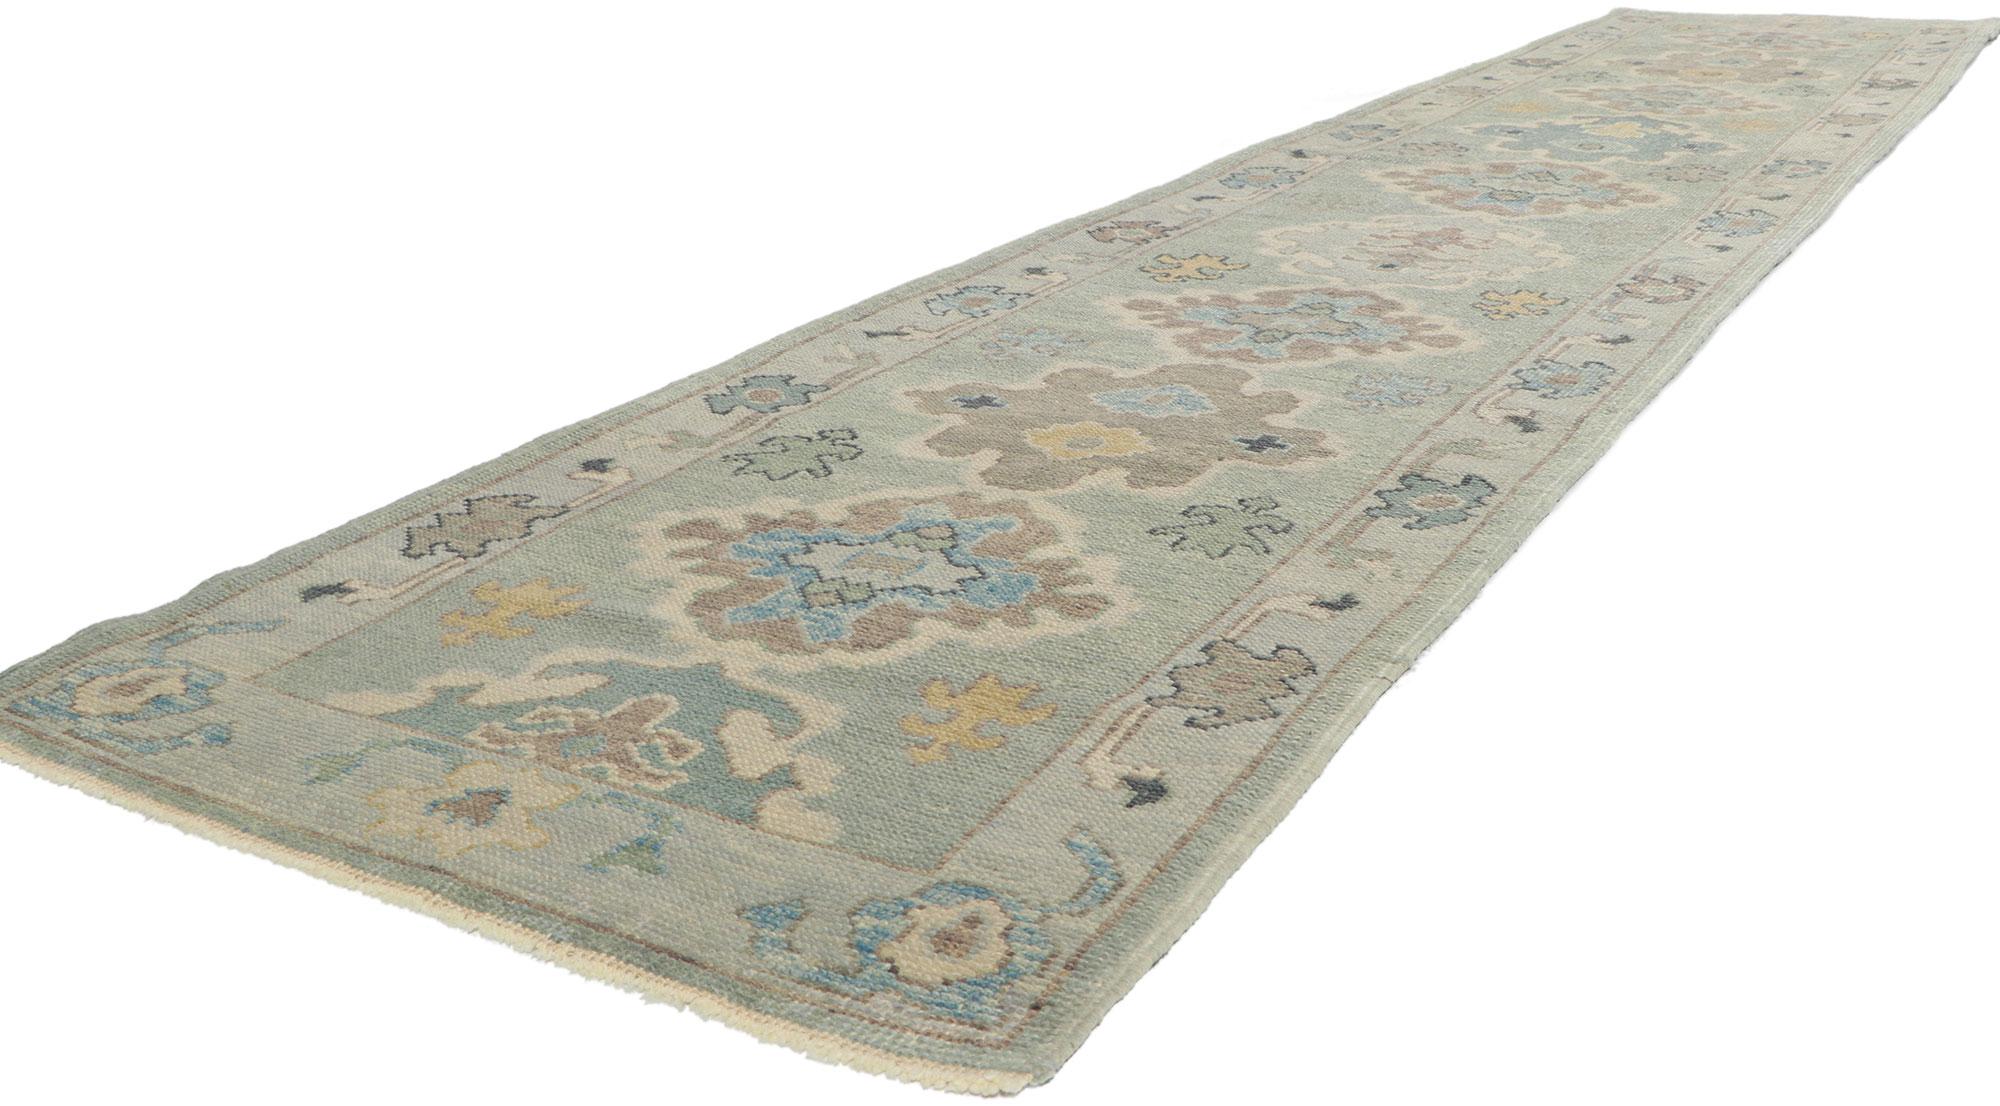 53801 New Contemporary Turkish Oushak Hallway runner with Modern Style 03'00 x 15'00. This hand-knotted wool contemporary Turkish Oushak runner features a botanical pattern spread across an abrashed Palladian colored backdrop. An array of botanical